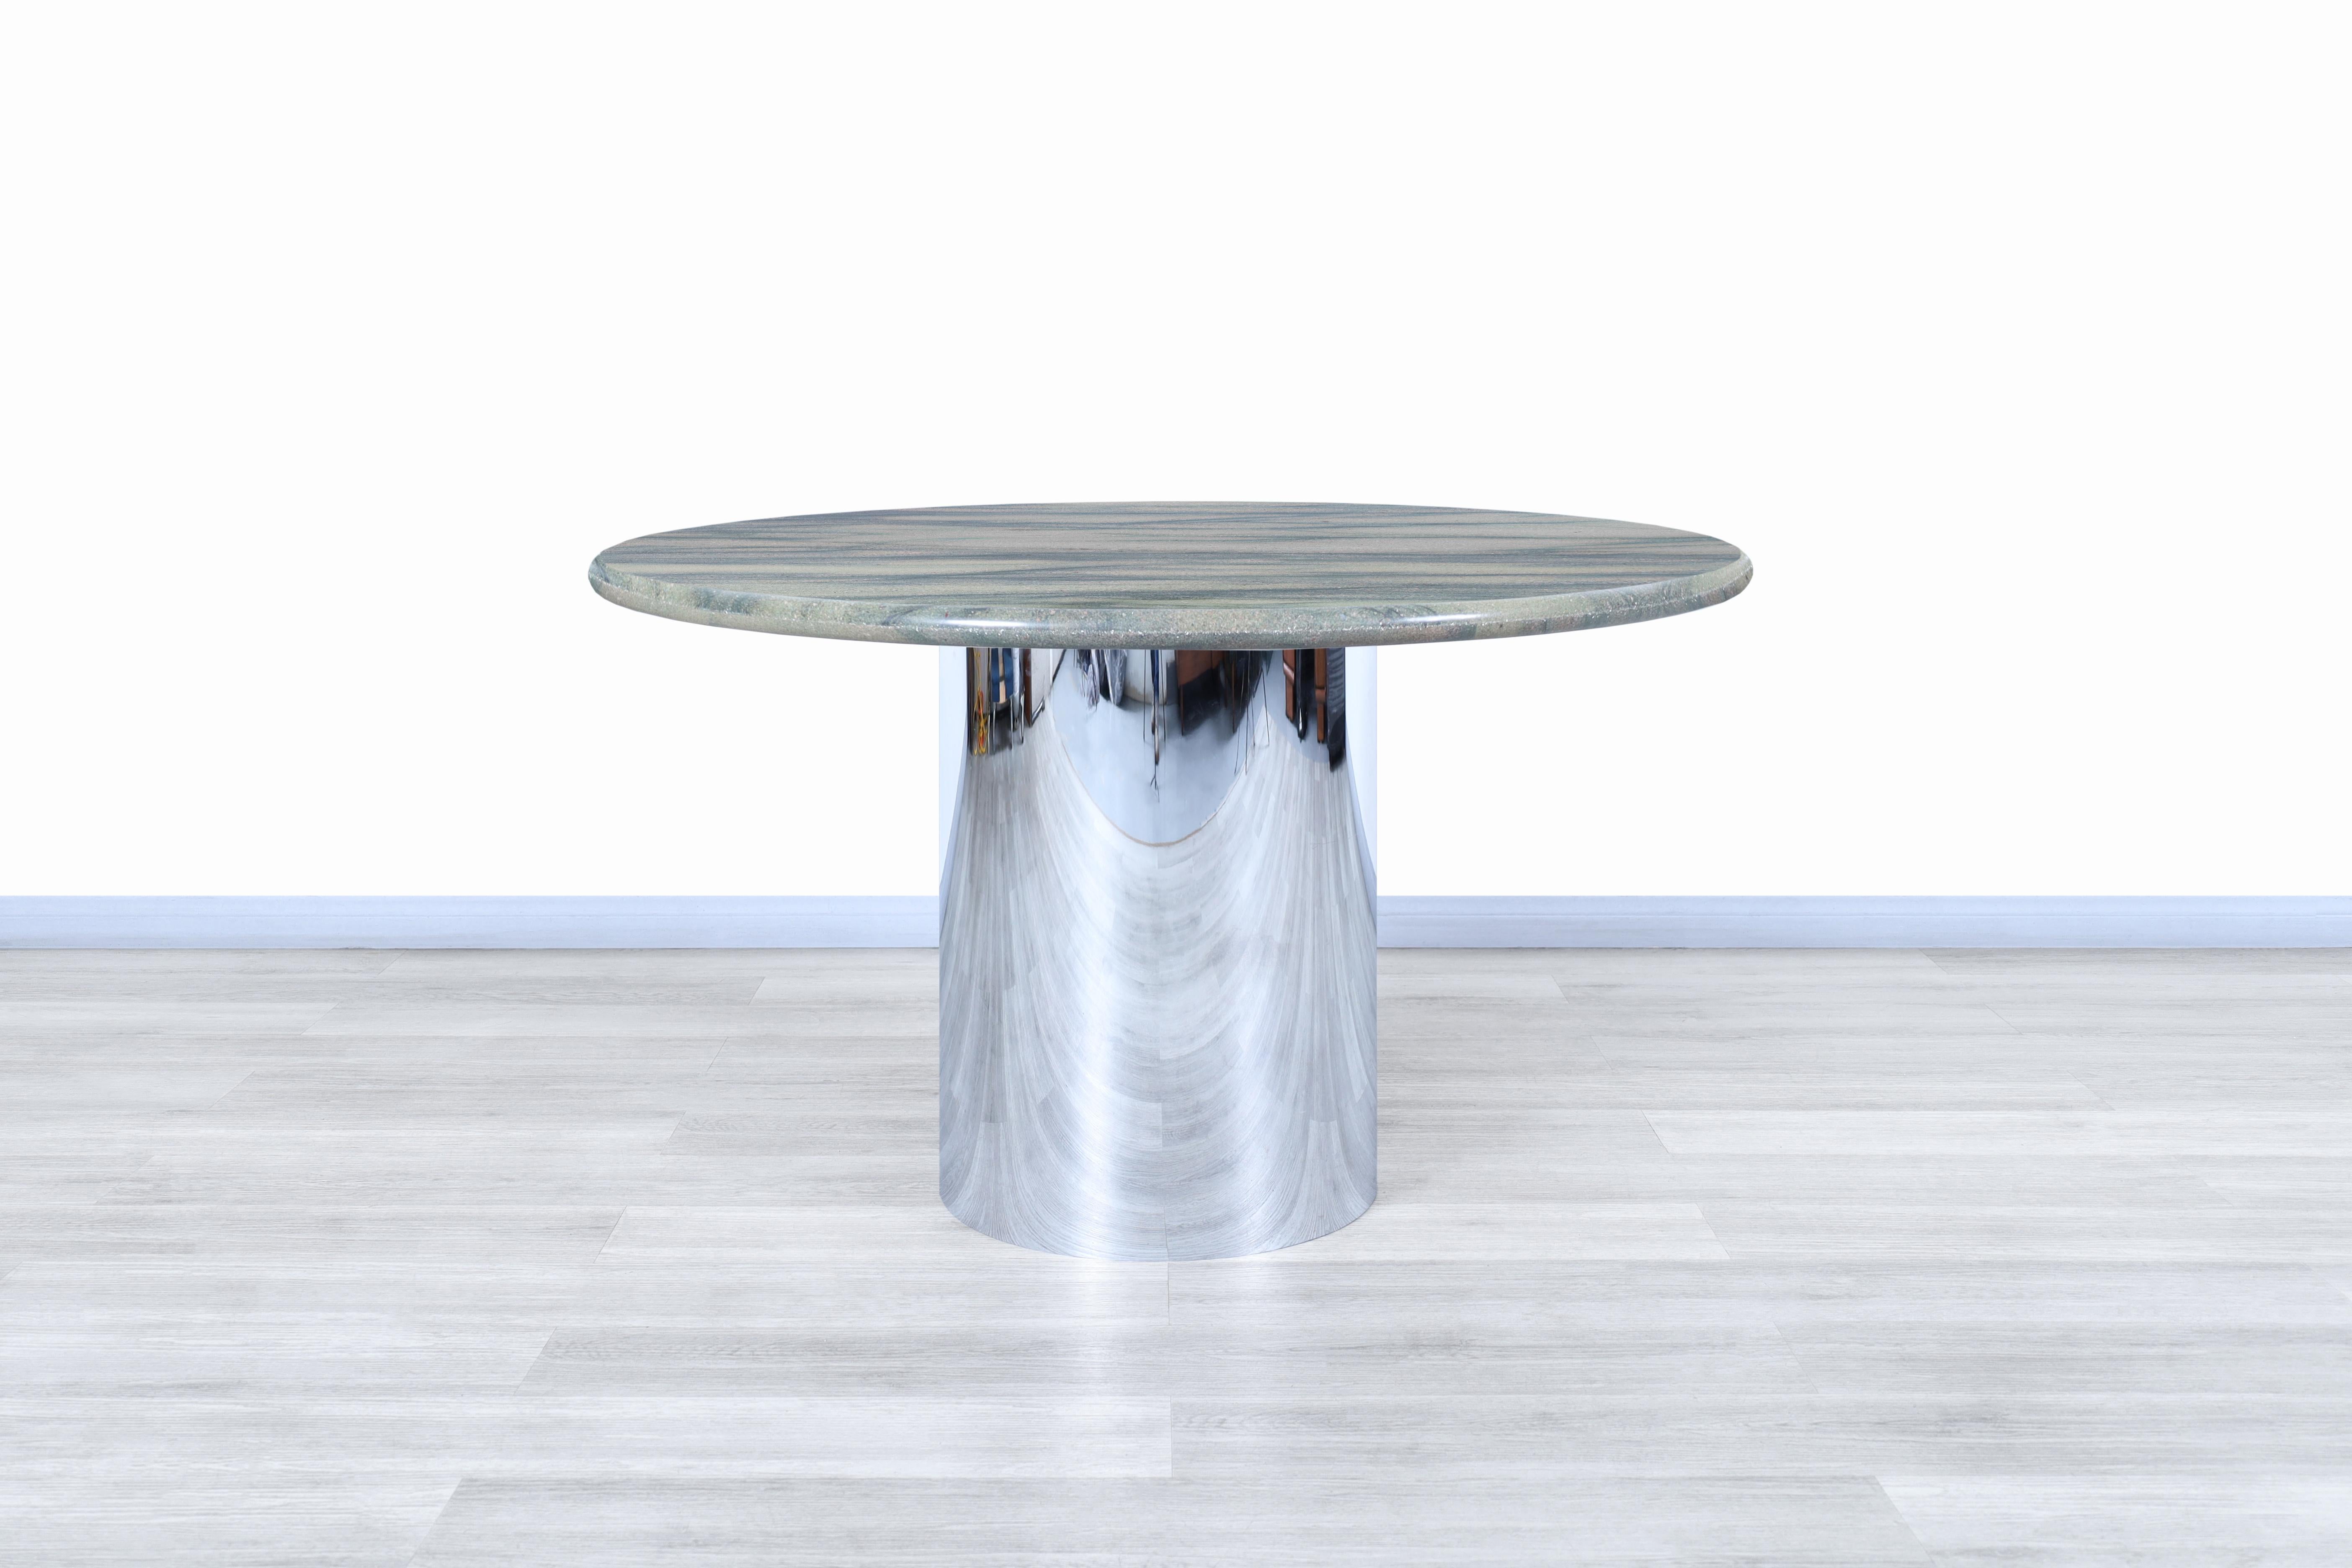 Wonderful vintage marble and stainless-steel round dining table designed and manufactured in the United States, circa 1980s. This table has a modern design where the rich veining distinguishes the highest quality of marble used in constructing this